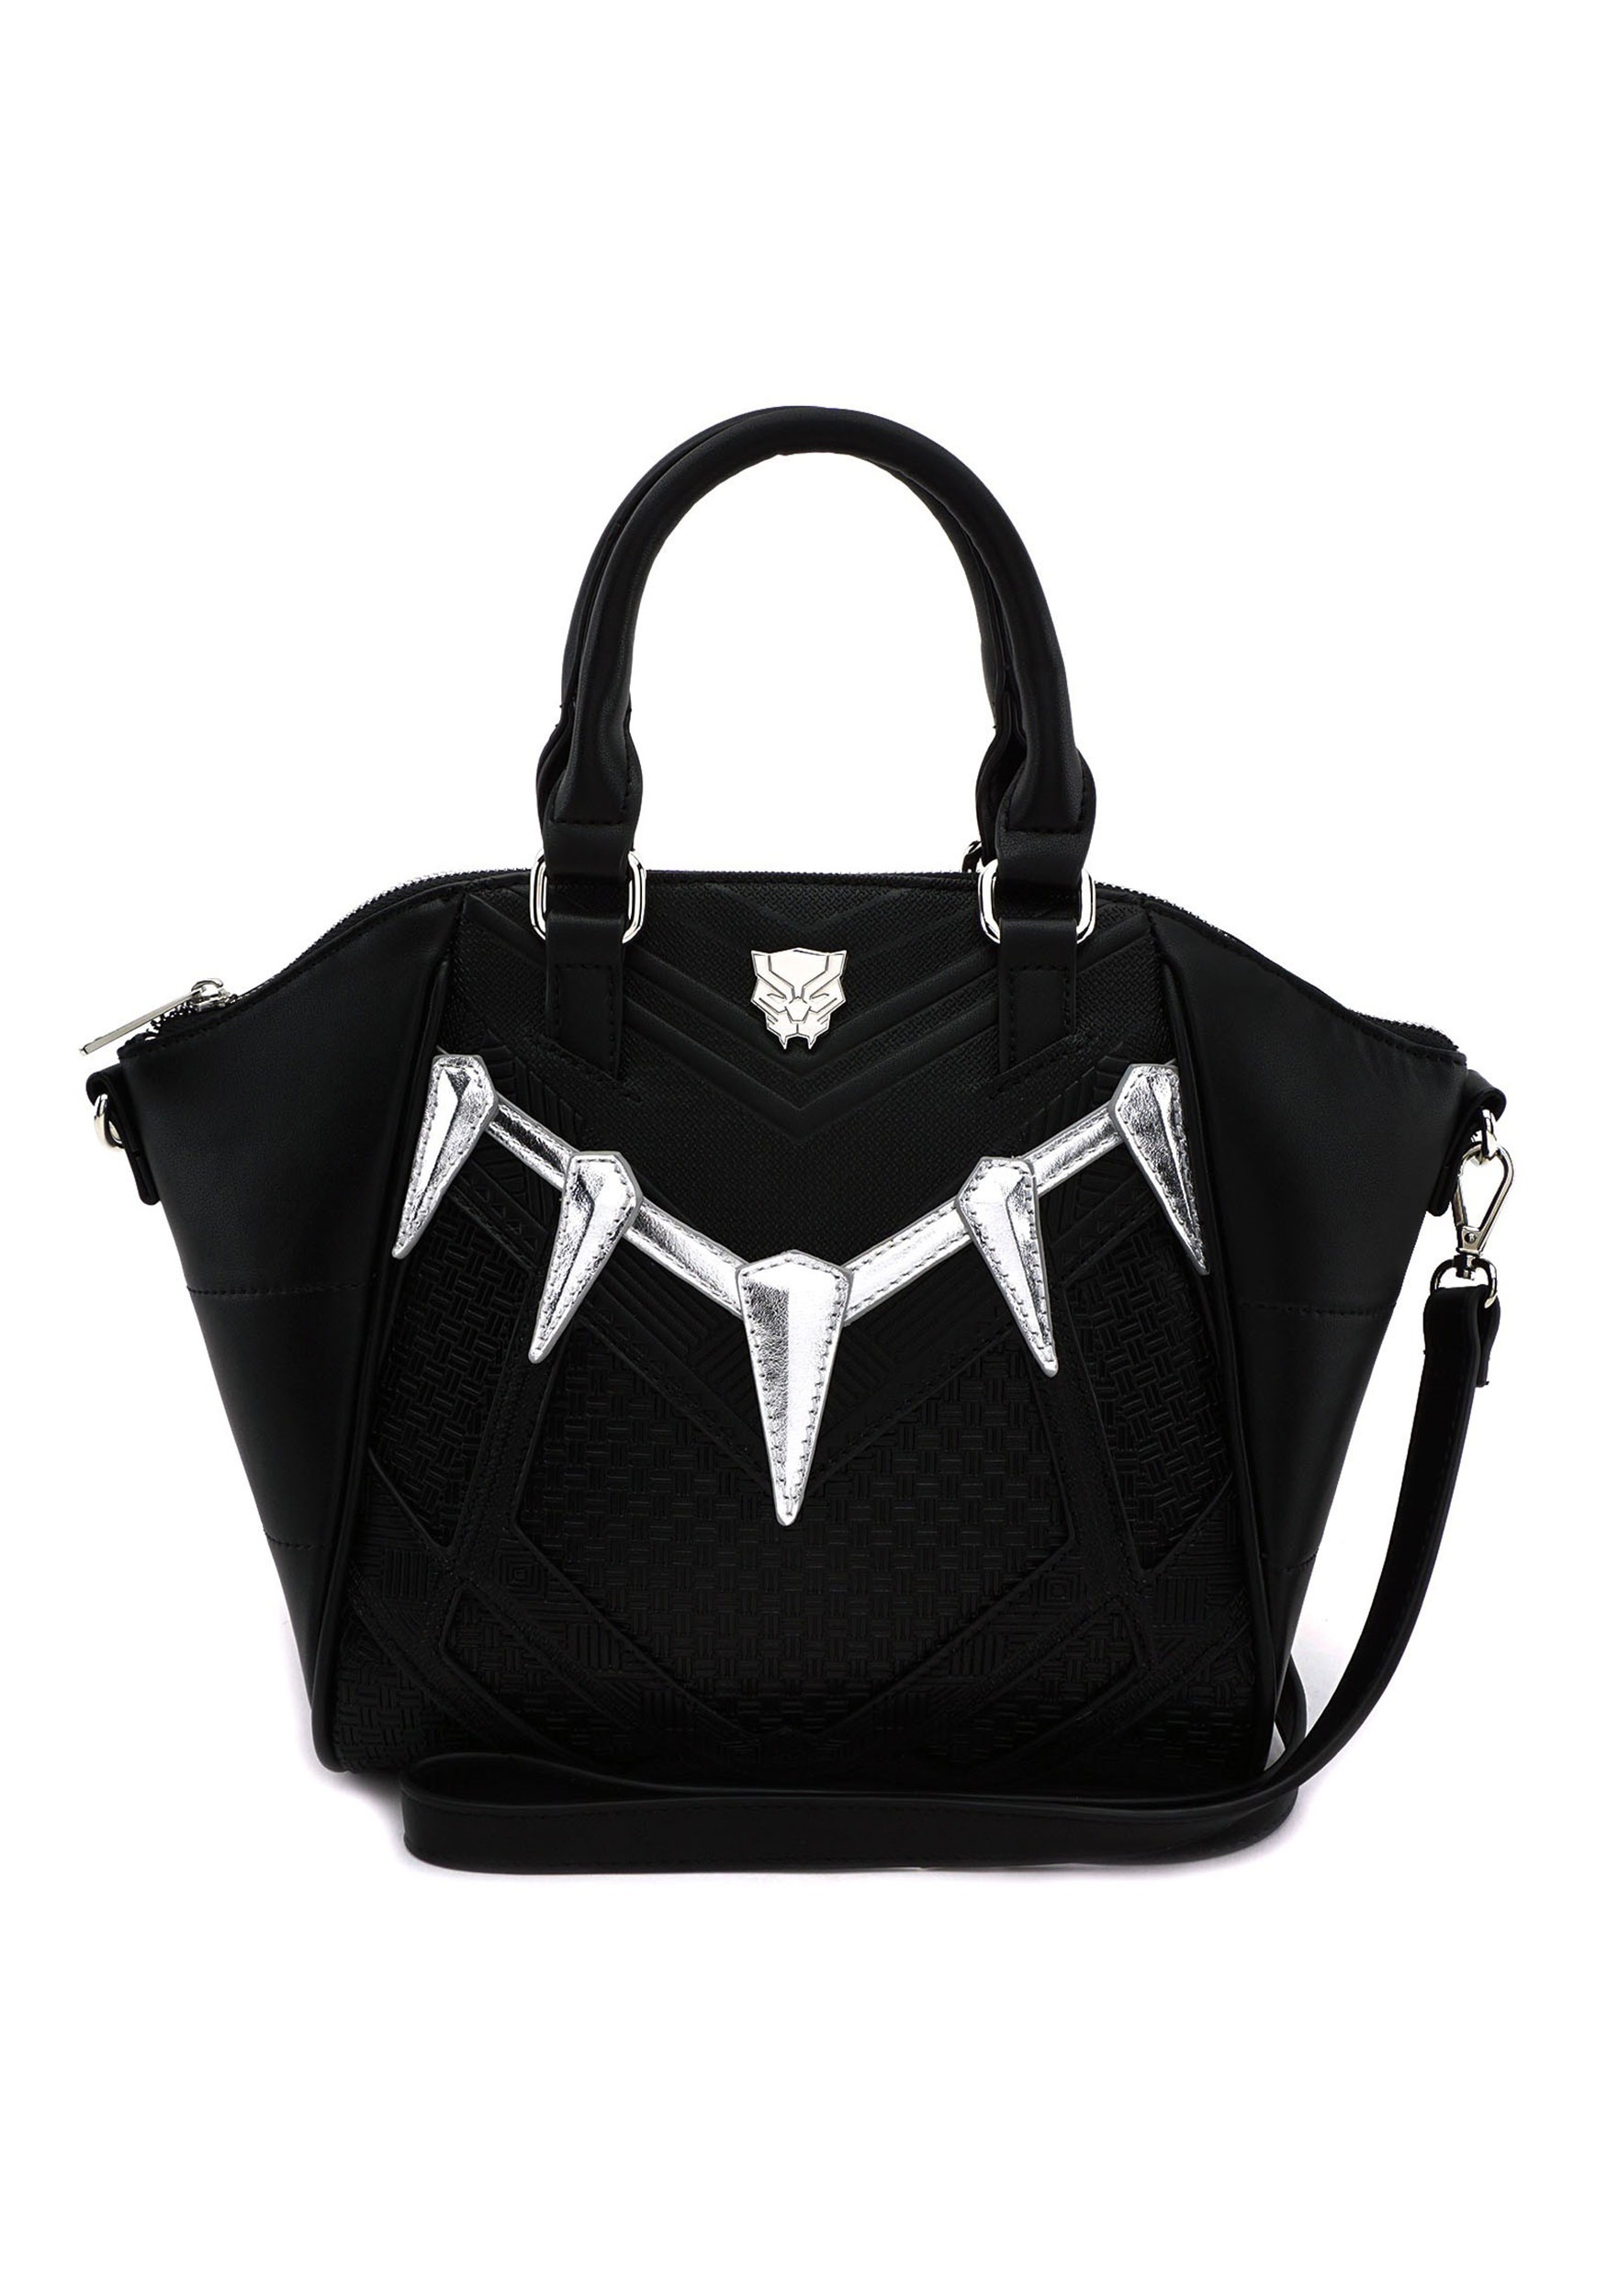 Black Panther Faux Leather Loungefly Handbag